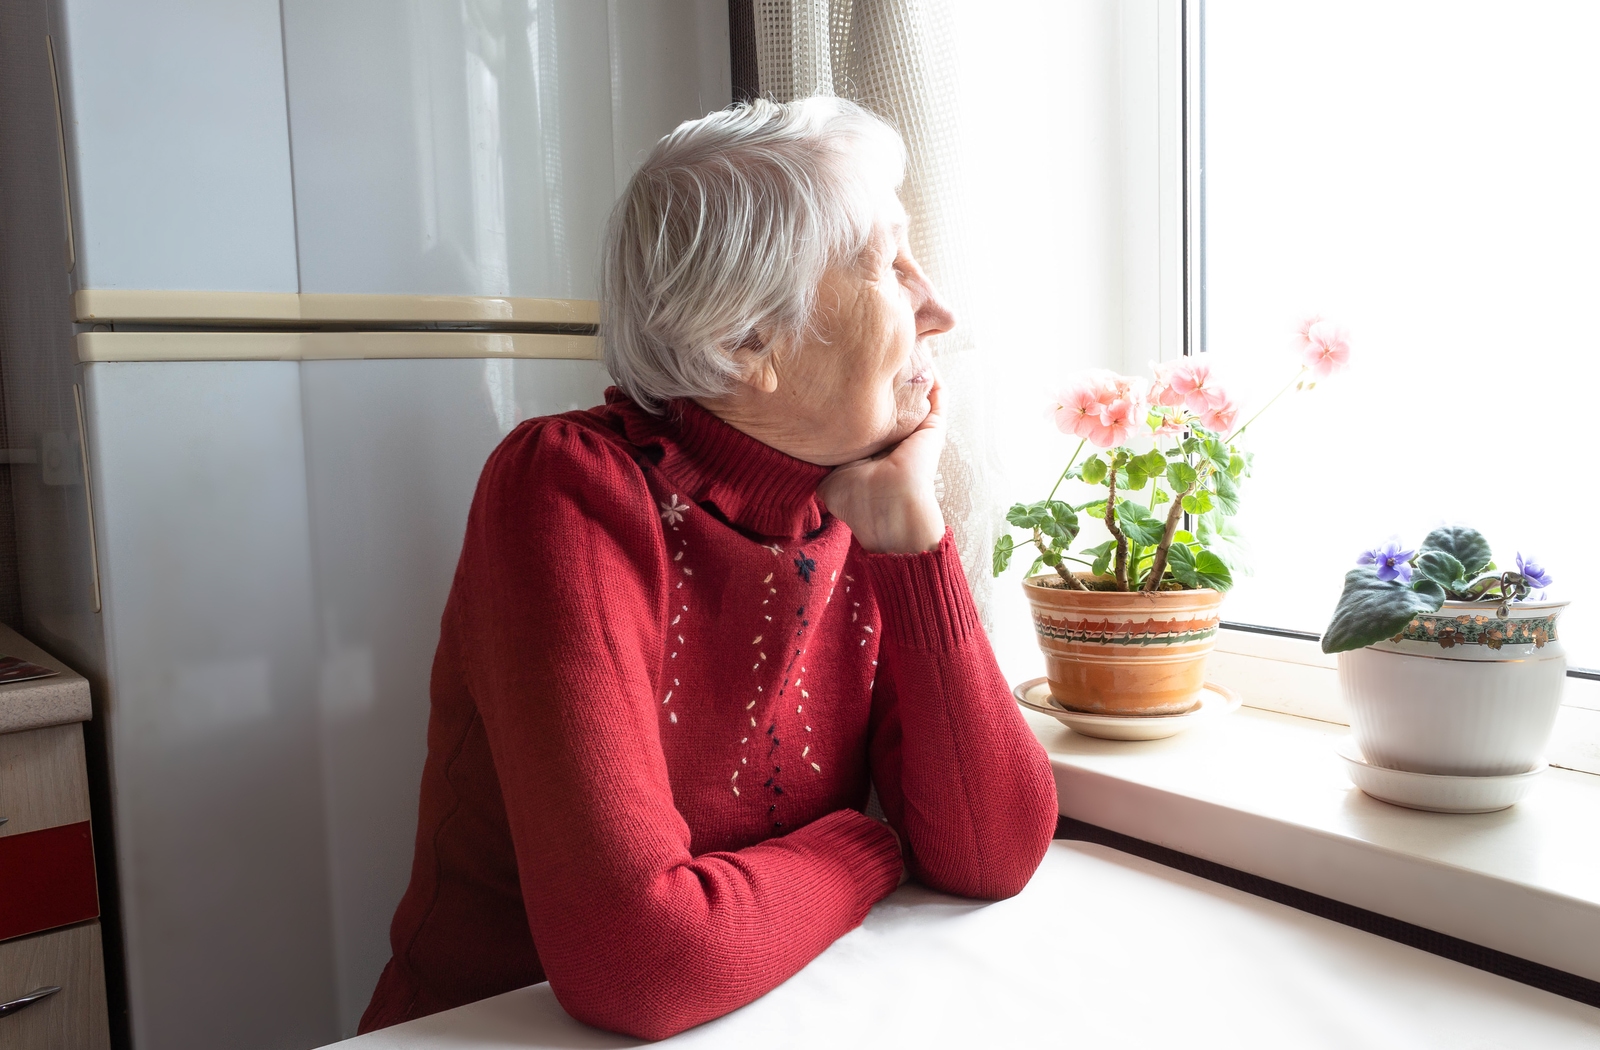 A senior woman wearing a red shirt sitting at a table in her kitchen, resting her chin on her arm looking out the window feeling a sense of loneliness